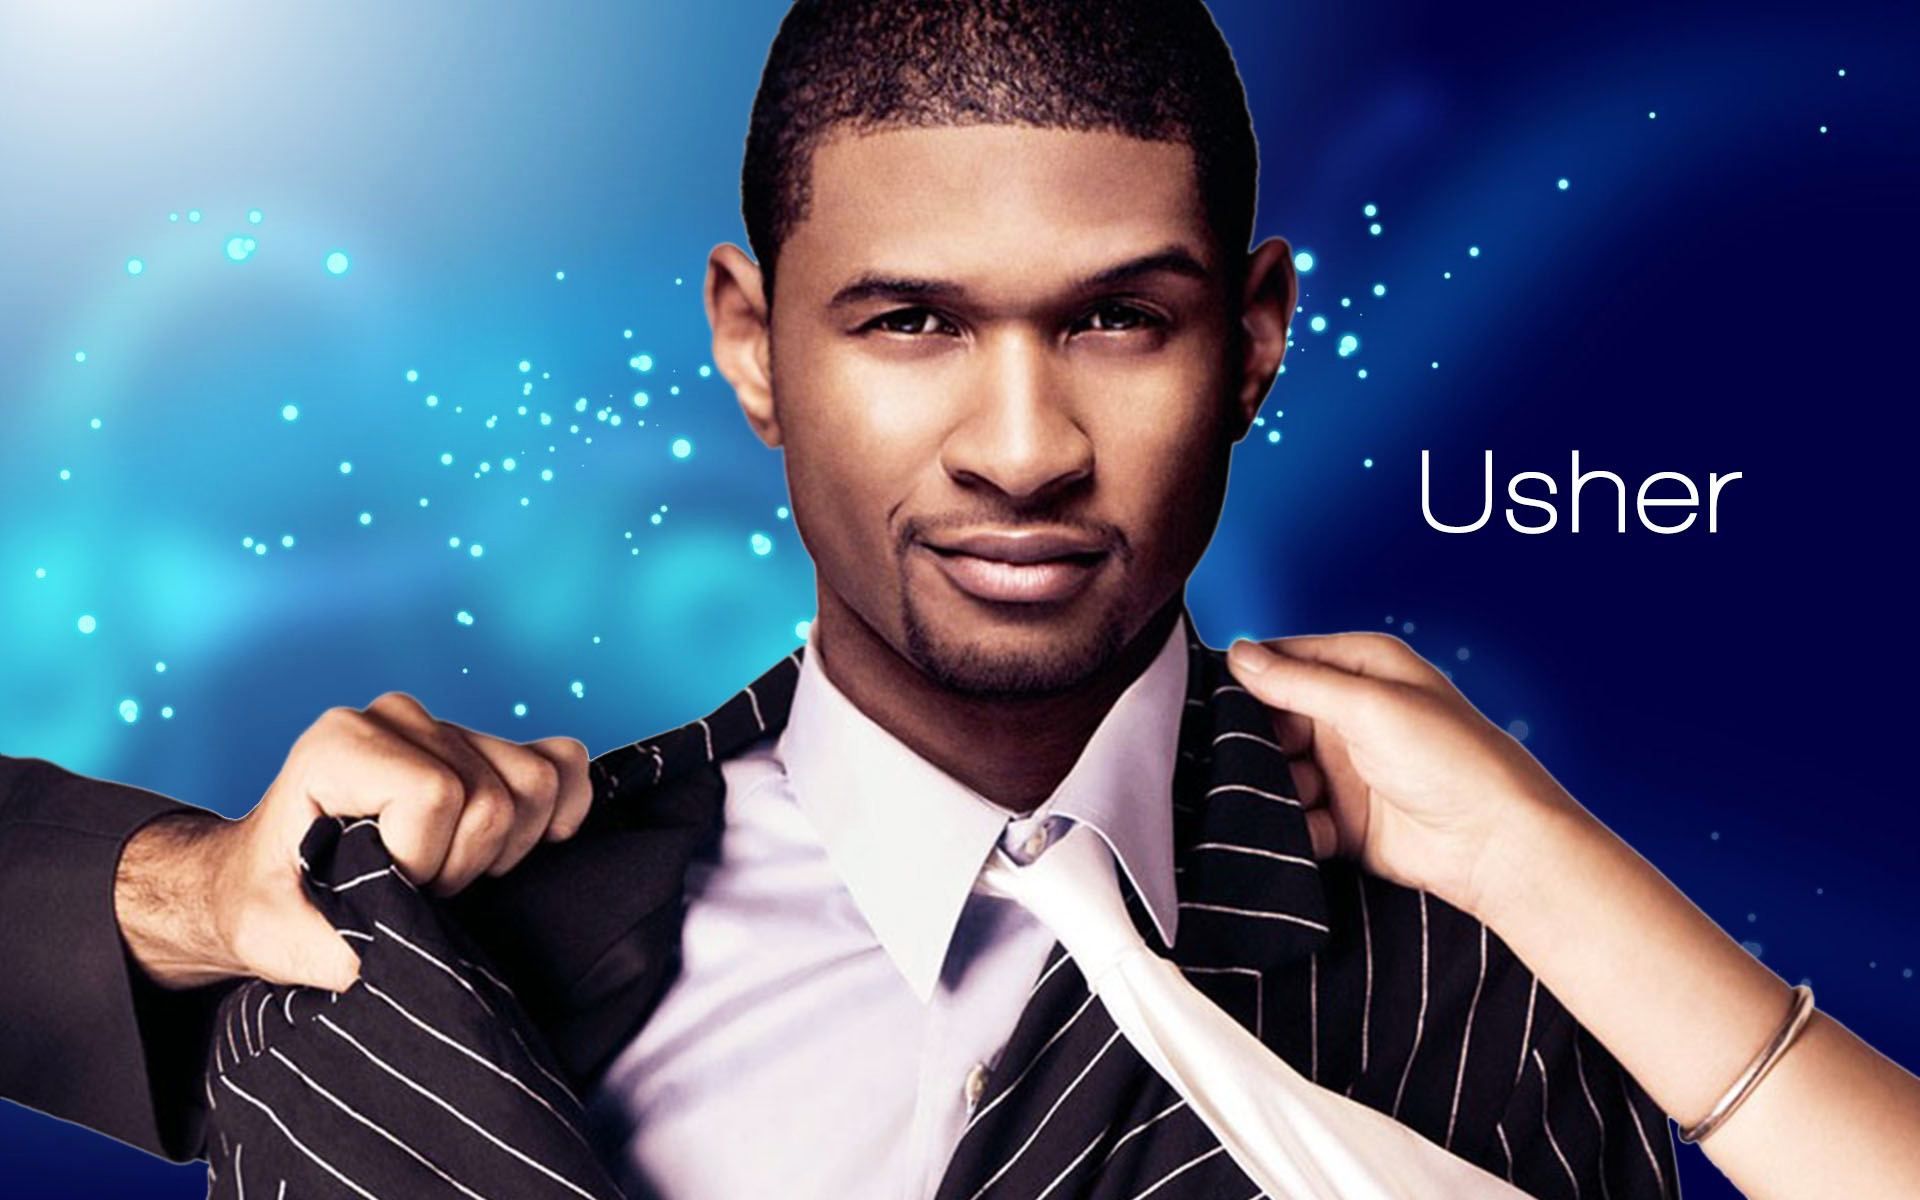 Gorgeous Usher Wallpaper | Full HD Pictures